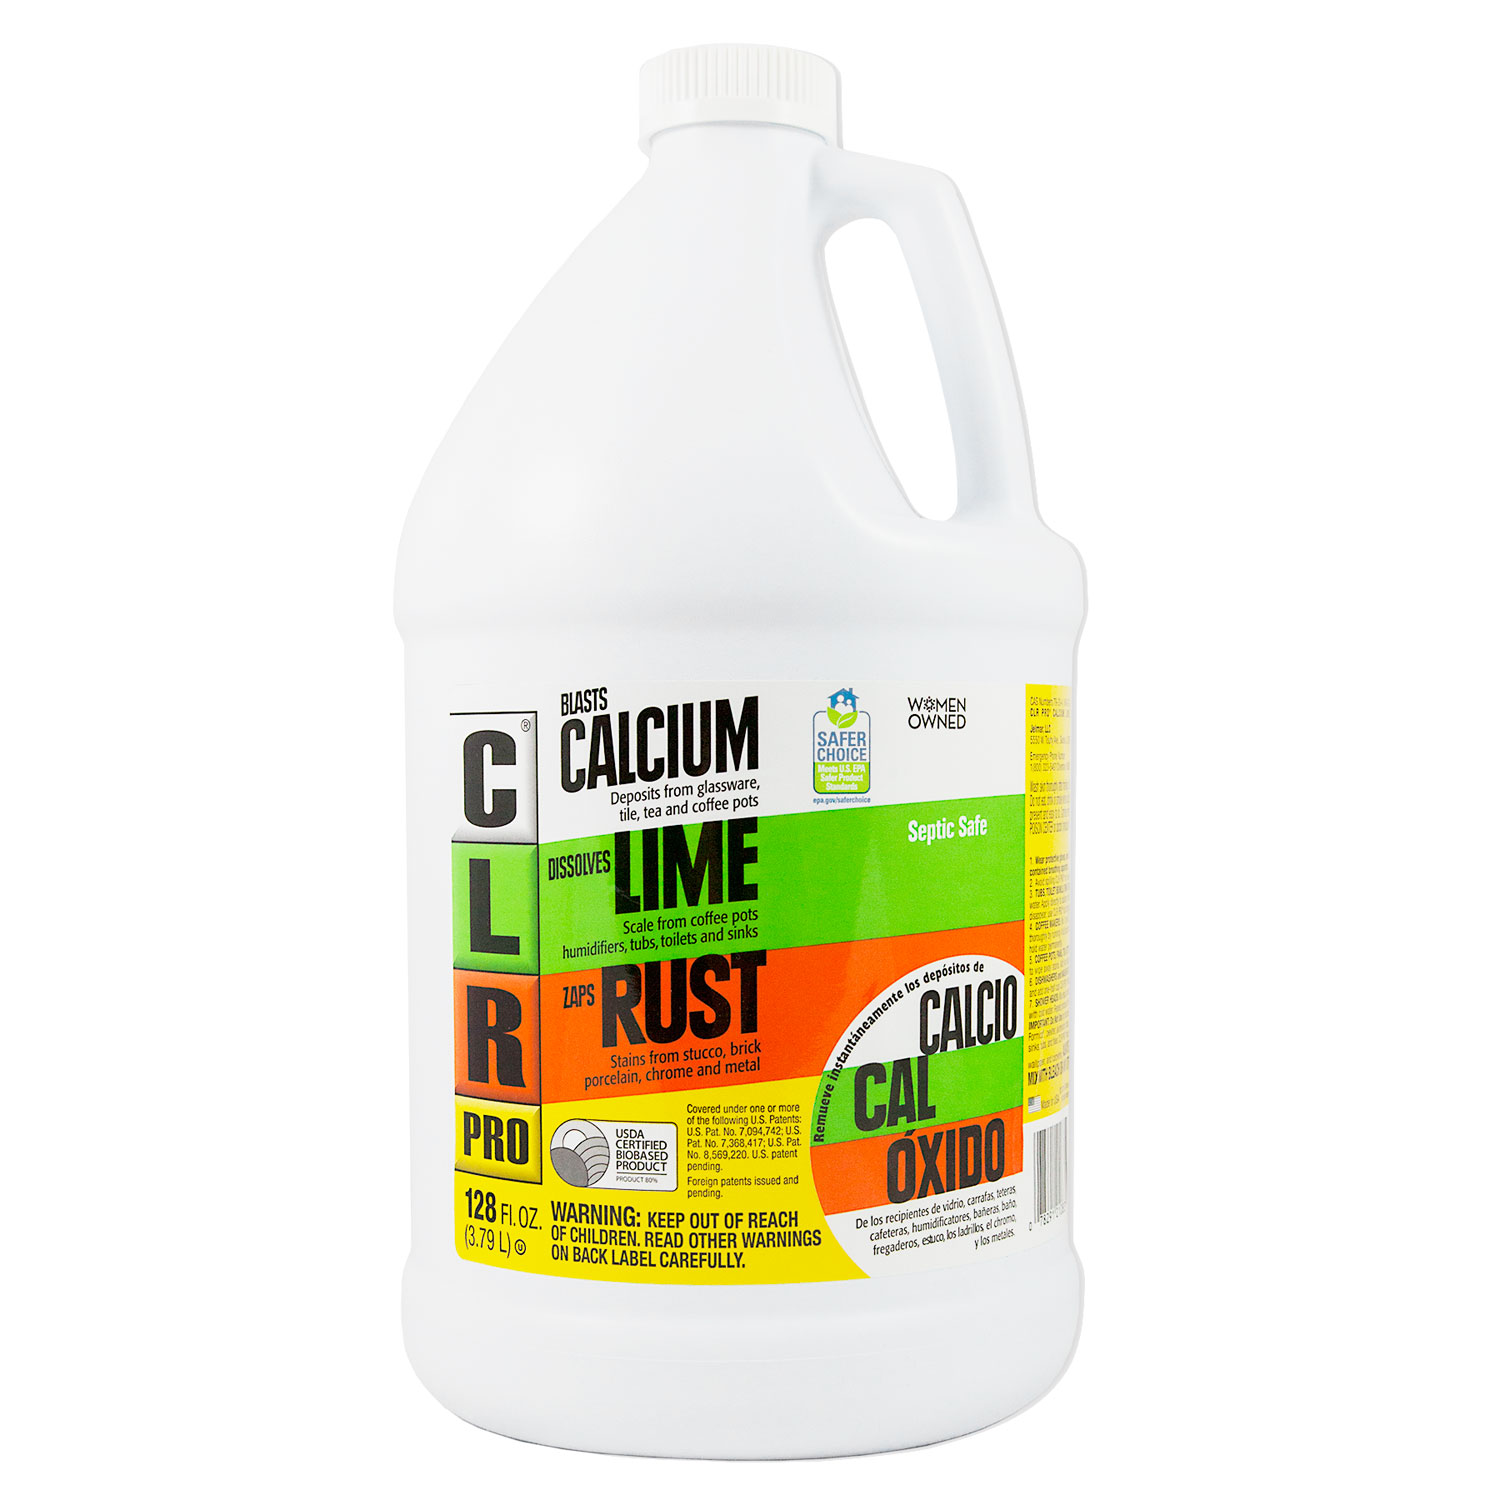  CLR PRO CL-4PRO Calcium, Lime and Rust Remover, 1 gal Bottle (JELCL4PROEA) 